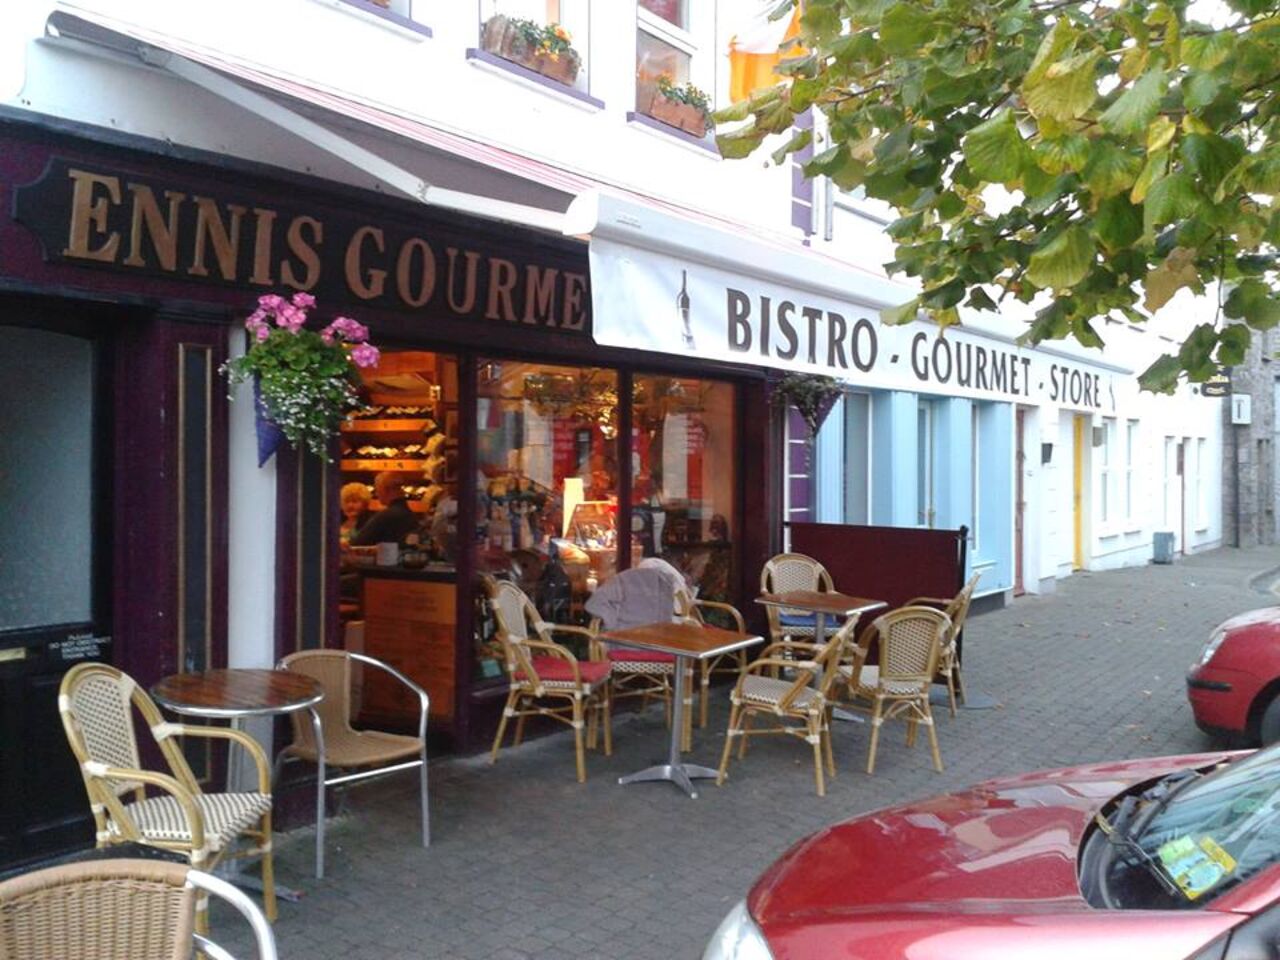 A photo of Ennis Gourmet Store